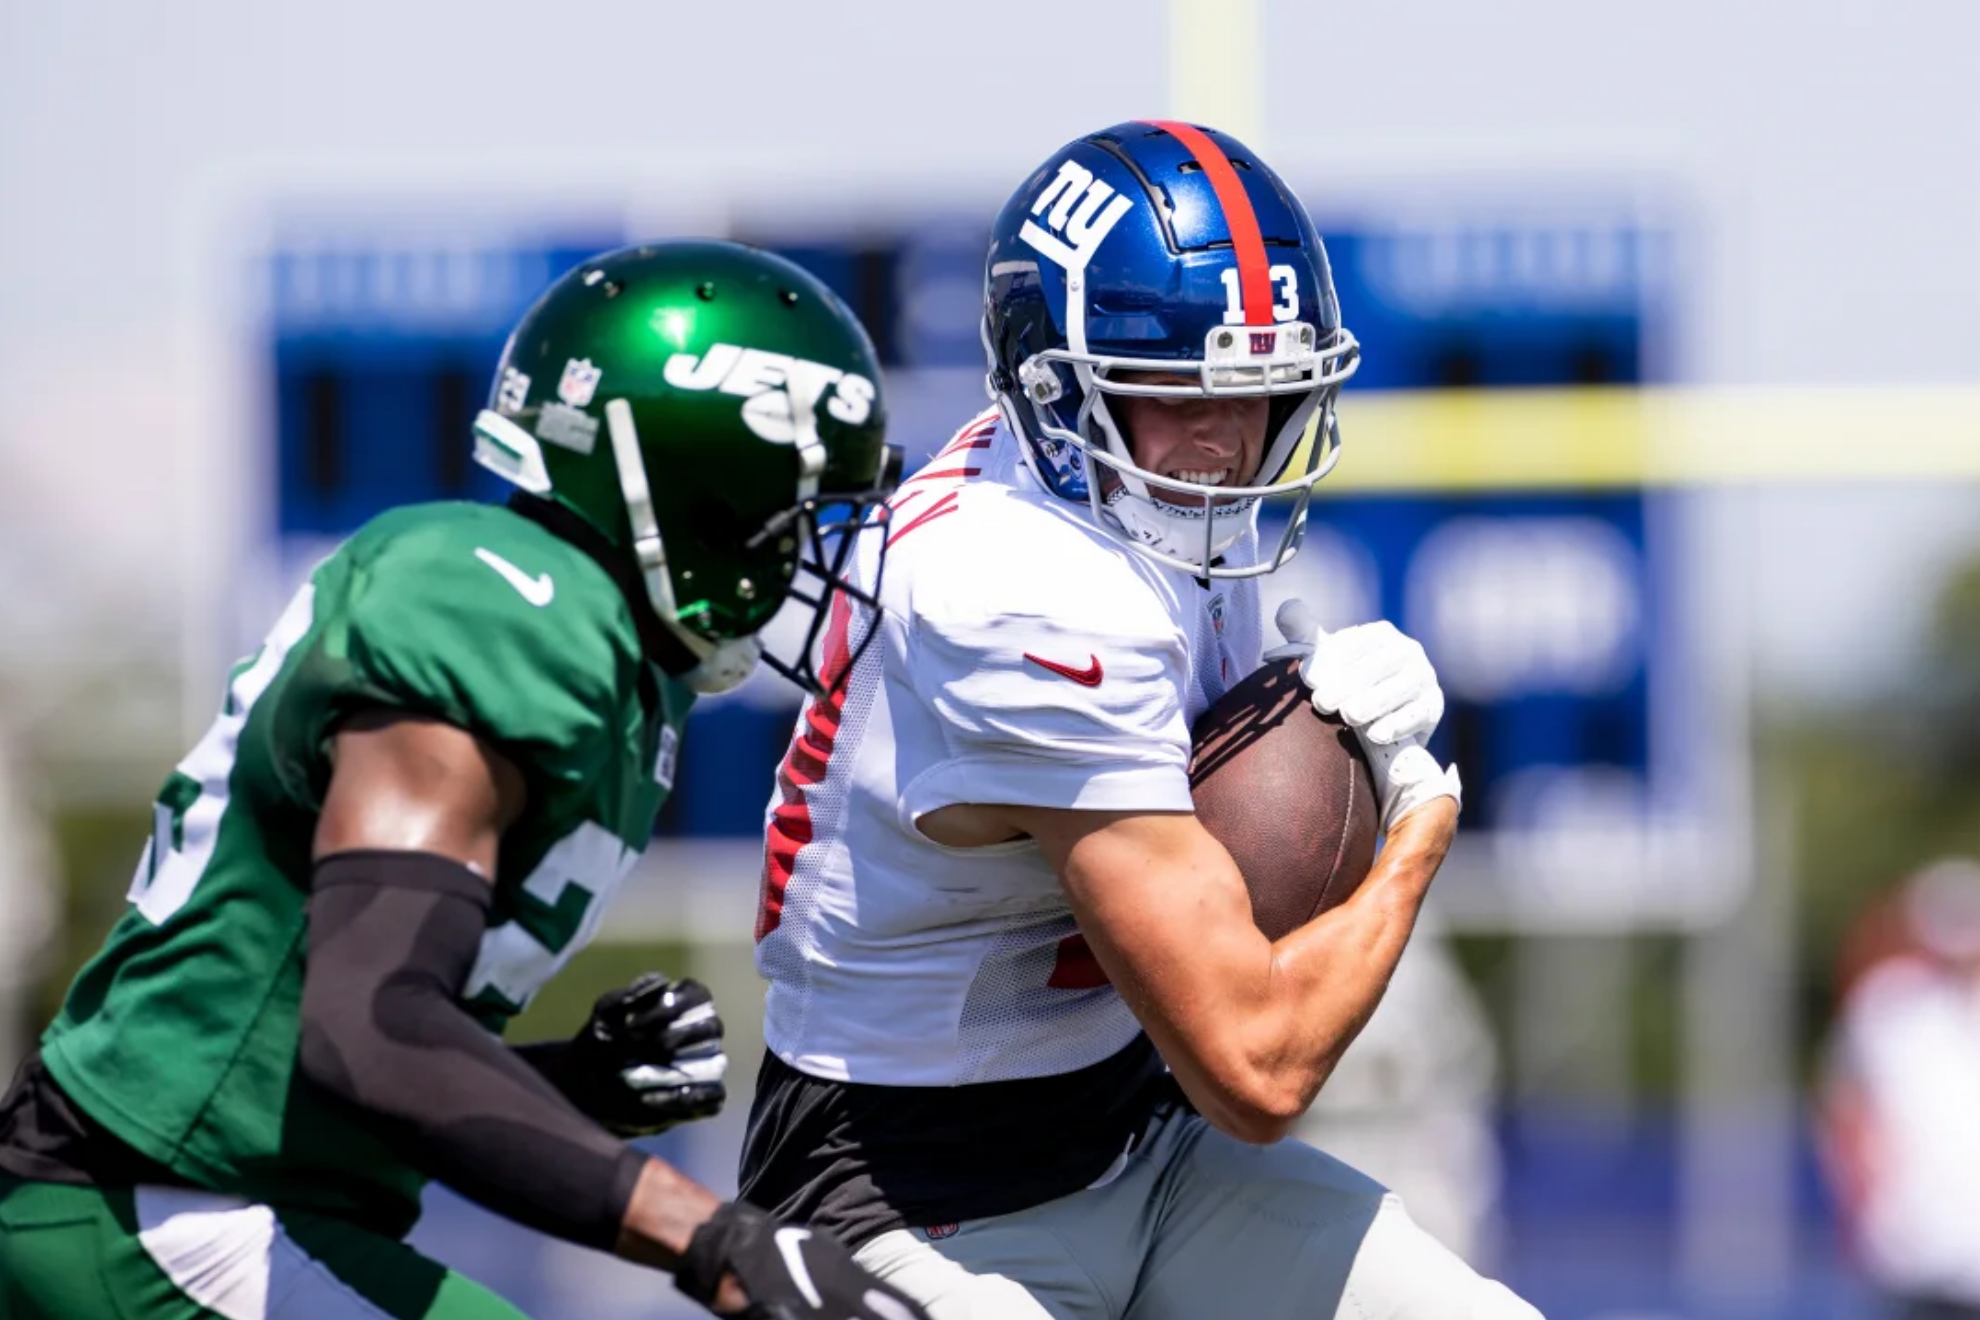 New York Jets and New York Giants joint practice - giants.com